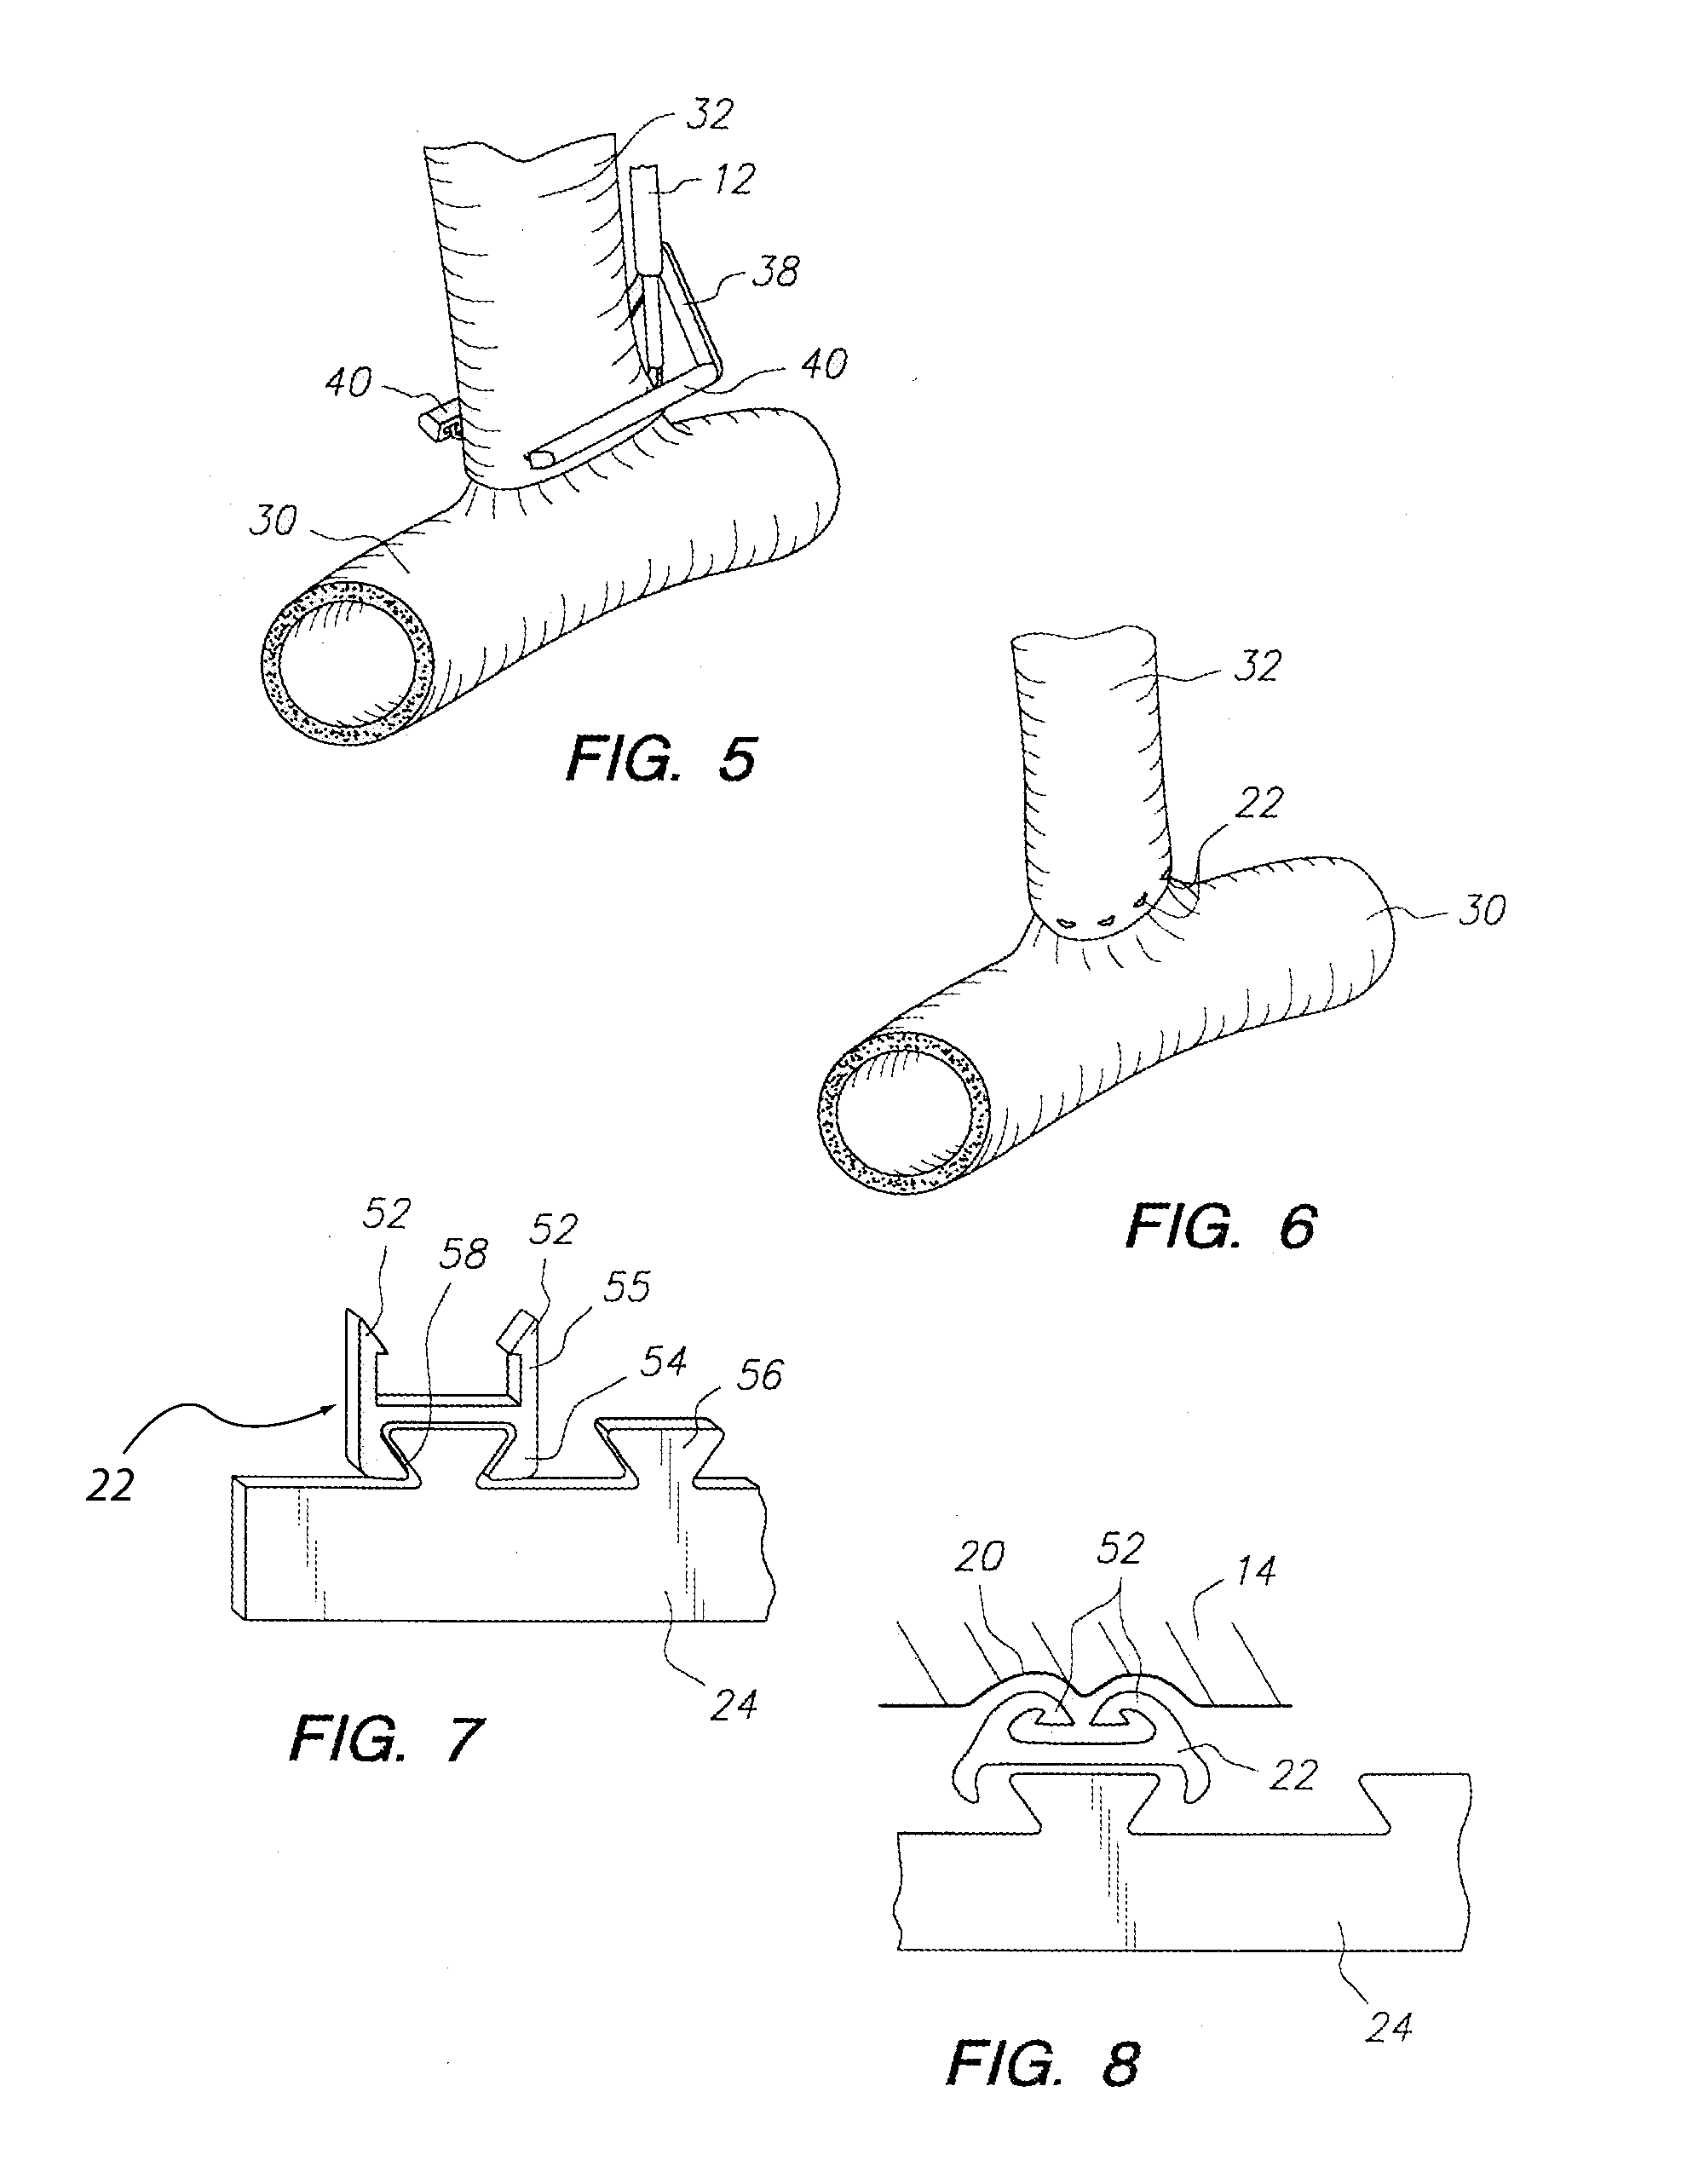 Anastomosis System with Anvil Entry Hole Sealer